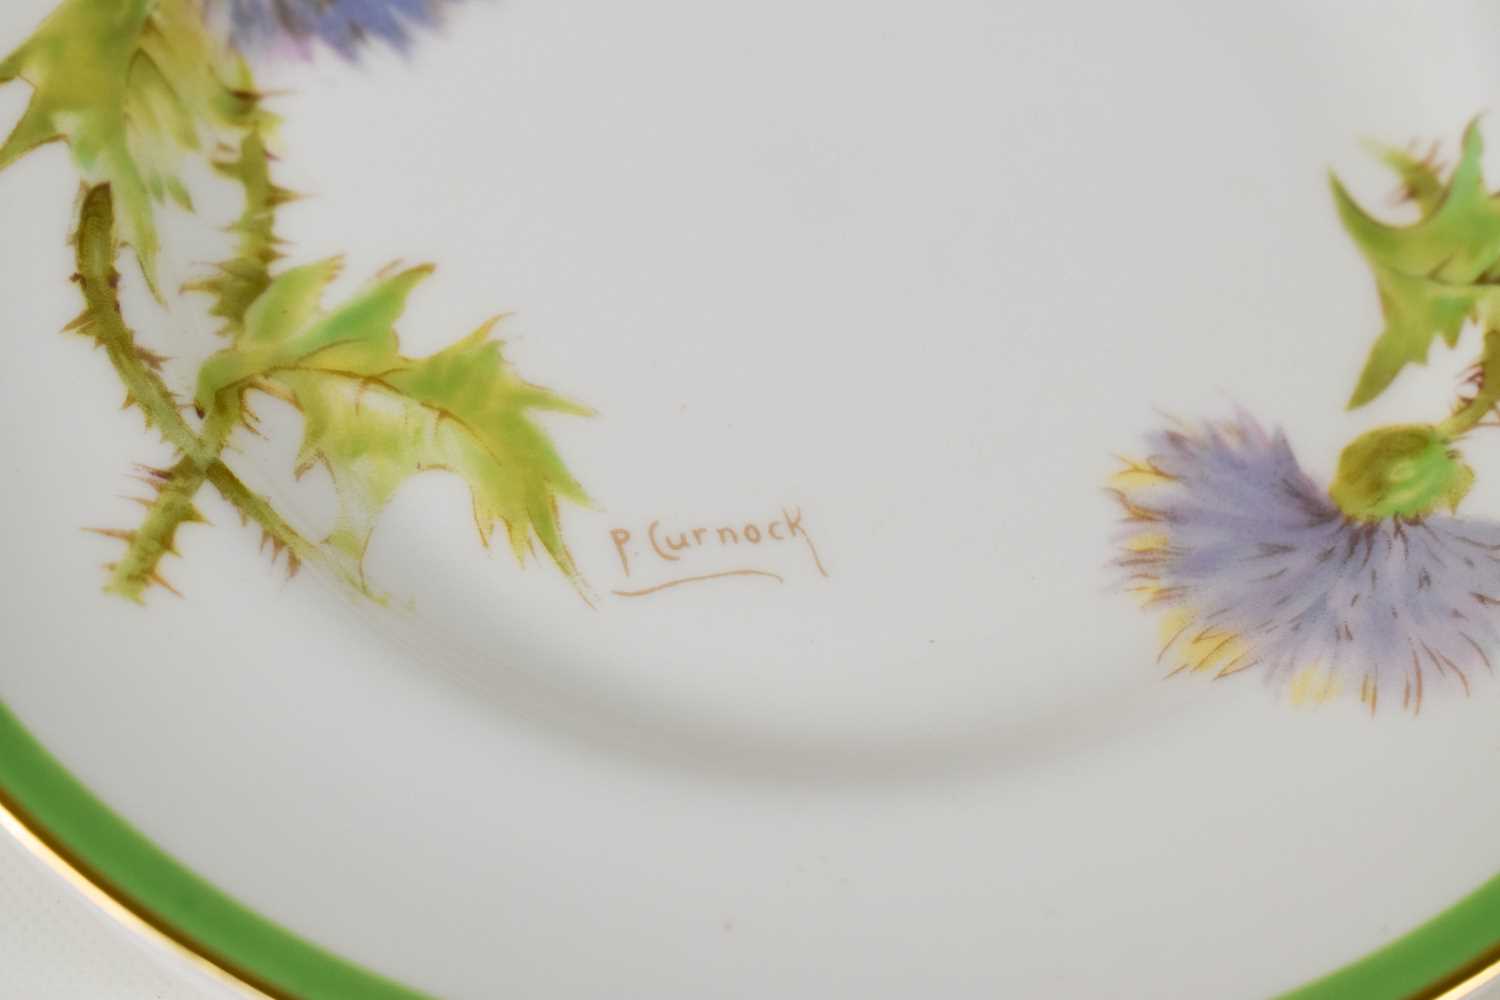 A Royal Doulton part tea service in the Glamis Thistle pattern by P Curnock, each piece signed and - Image 2 of 3